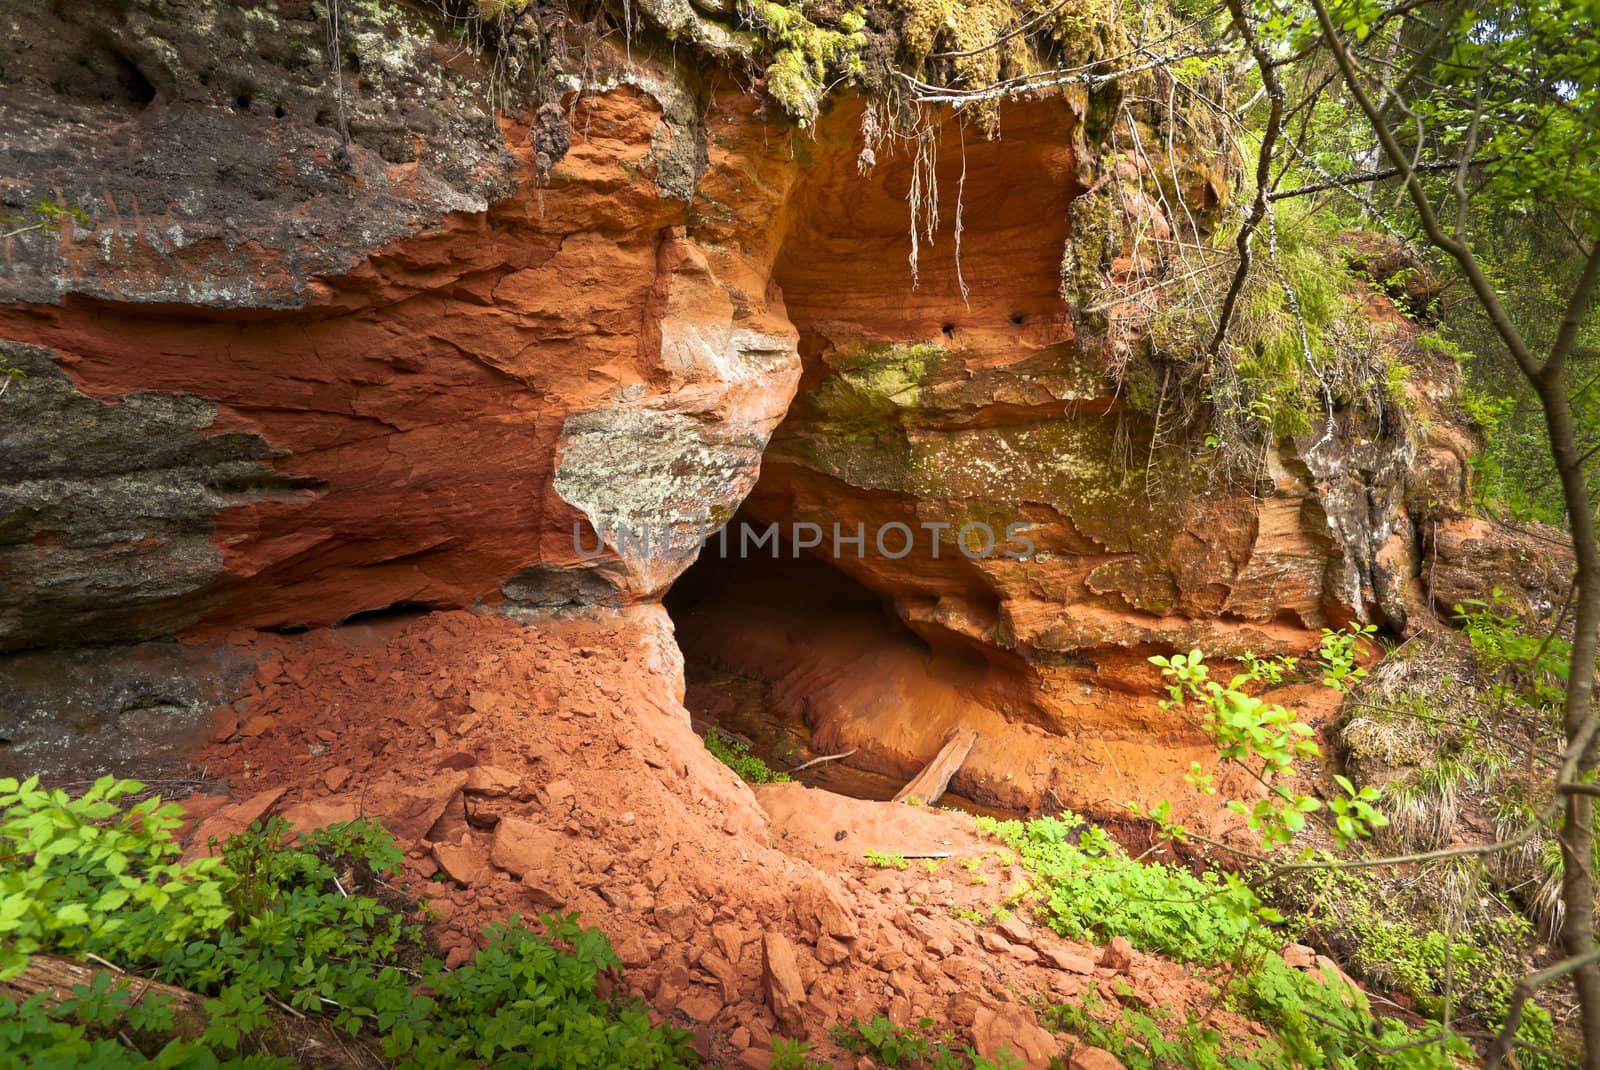 Red cave with falling pressed sand at the entrance